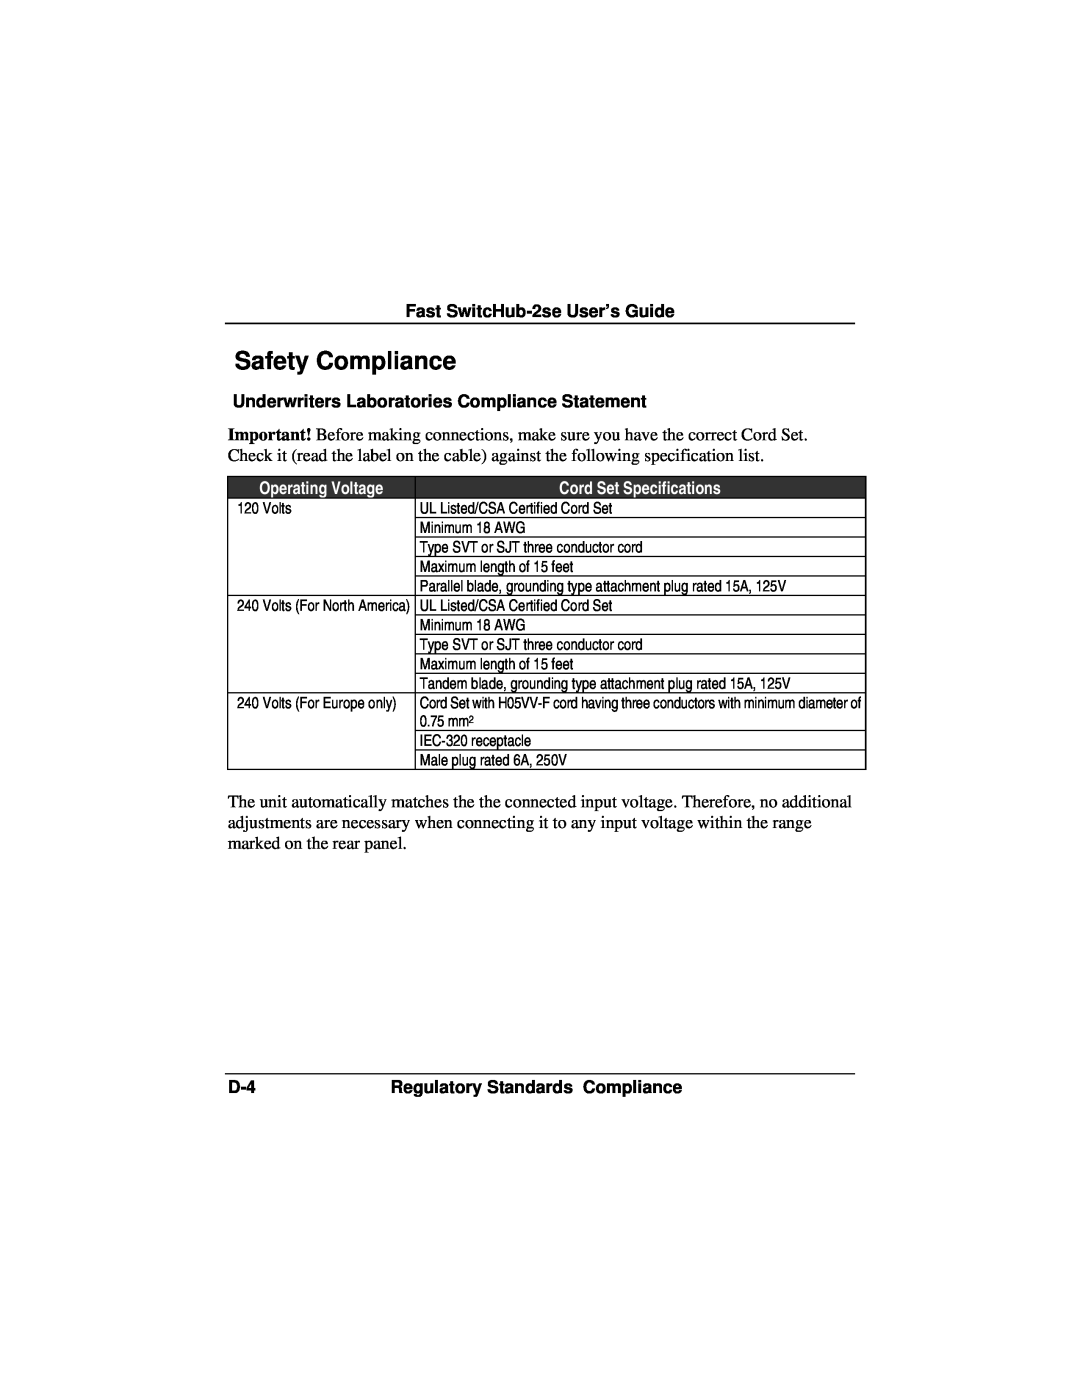 Accton Technology ES3002-TF Safety Compliance, Fast SwitcHub-2se User’s Guide, Operating Voltage, Cord Set Specifications 